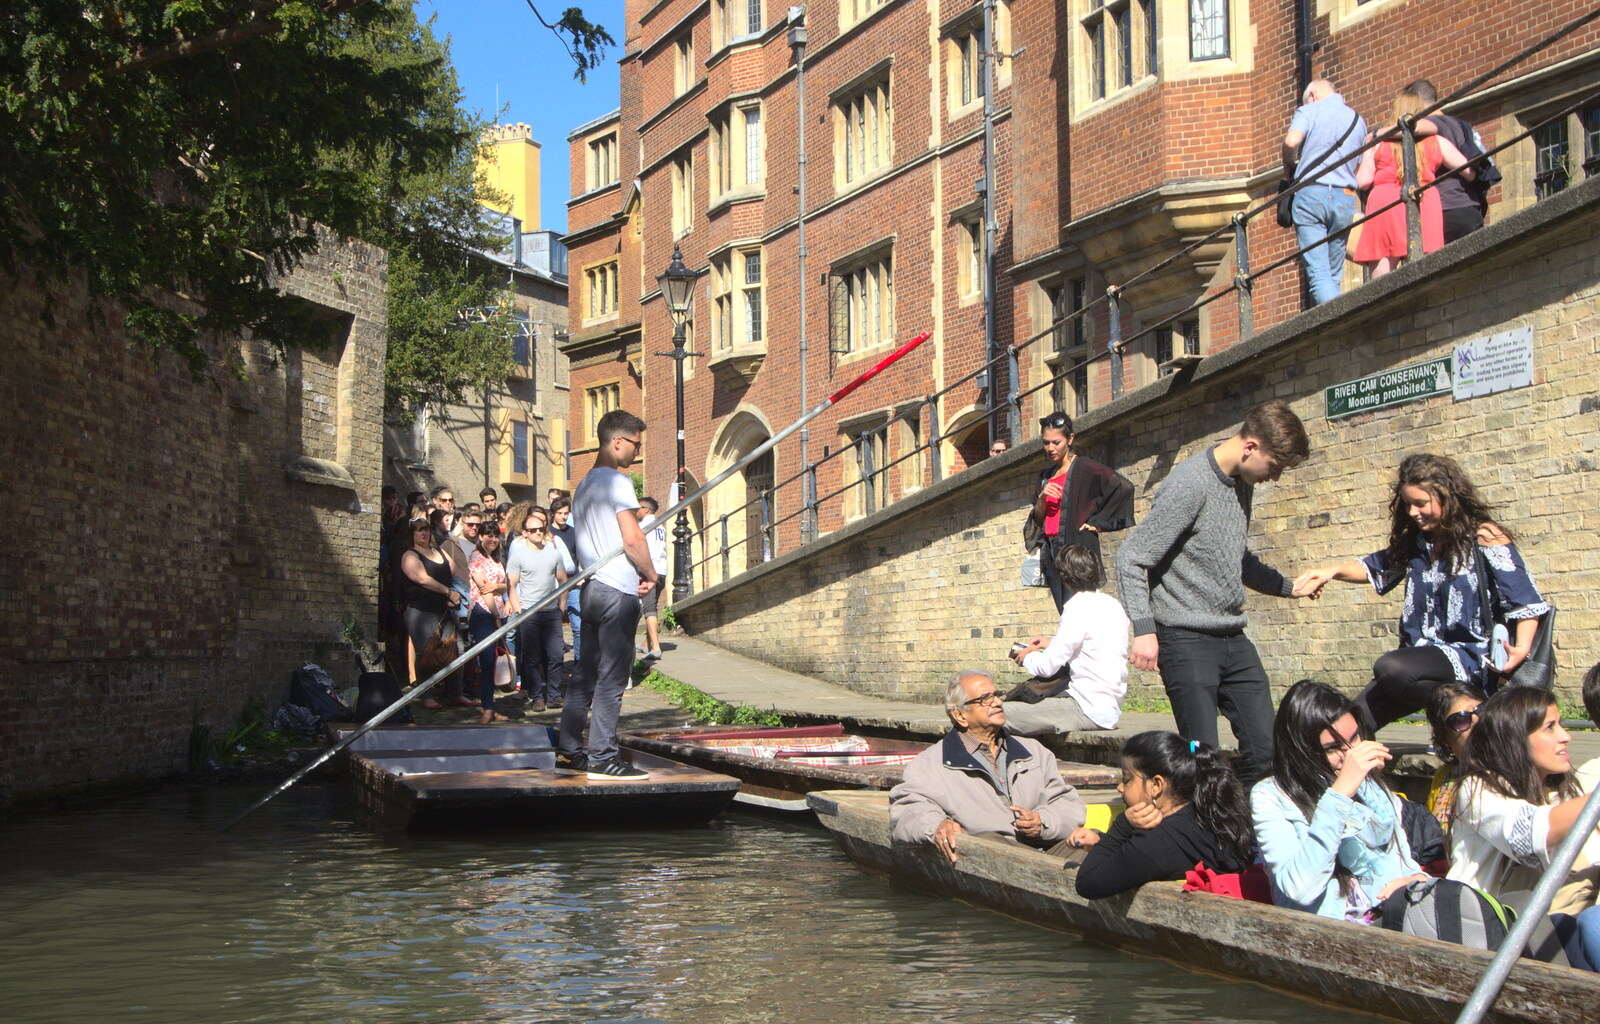 The end of Garret Hostel Lane from Punting With Grandad, Cambridge, Cambridgeshire - 6th June 2015